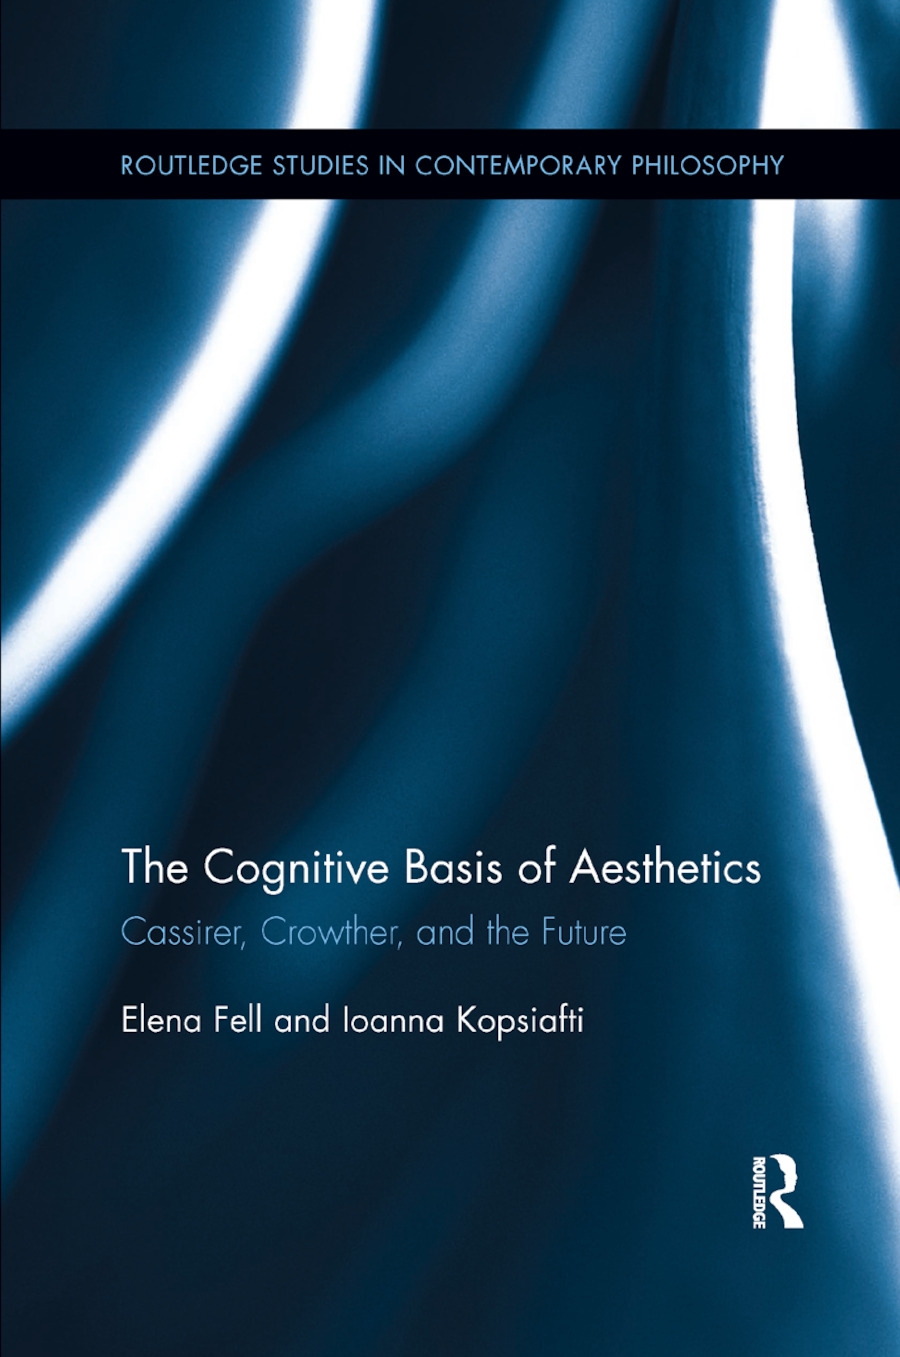 The Cognitive Basis of Aesthetics: Cassirer, Crowther, and the Future